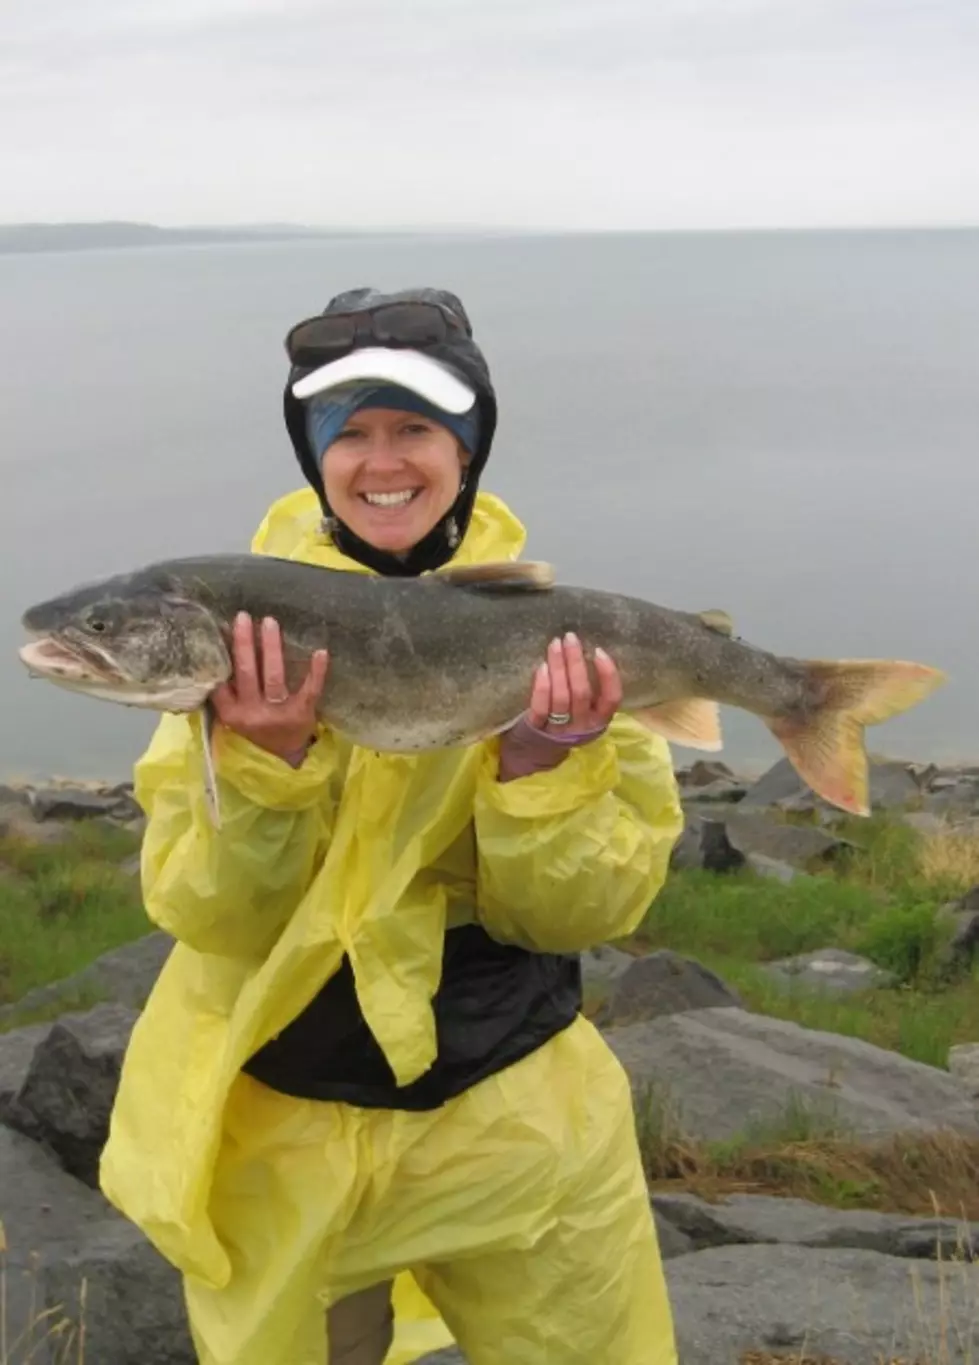 Congratulations to Our &#8216;Biggest Catch&#8217; Photo Contest Winner Jessica Doke